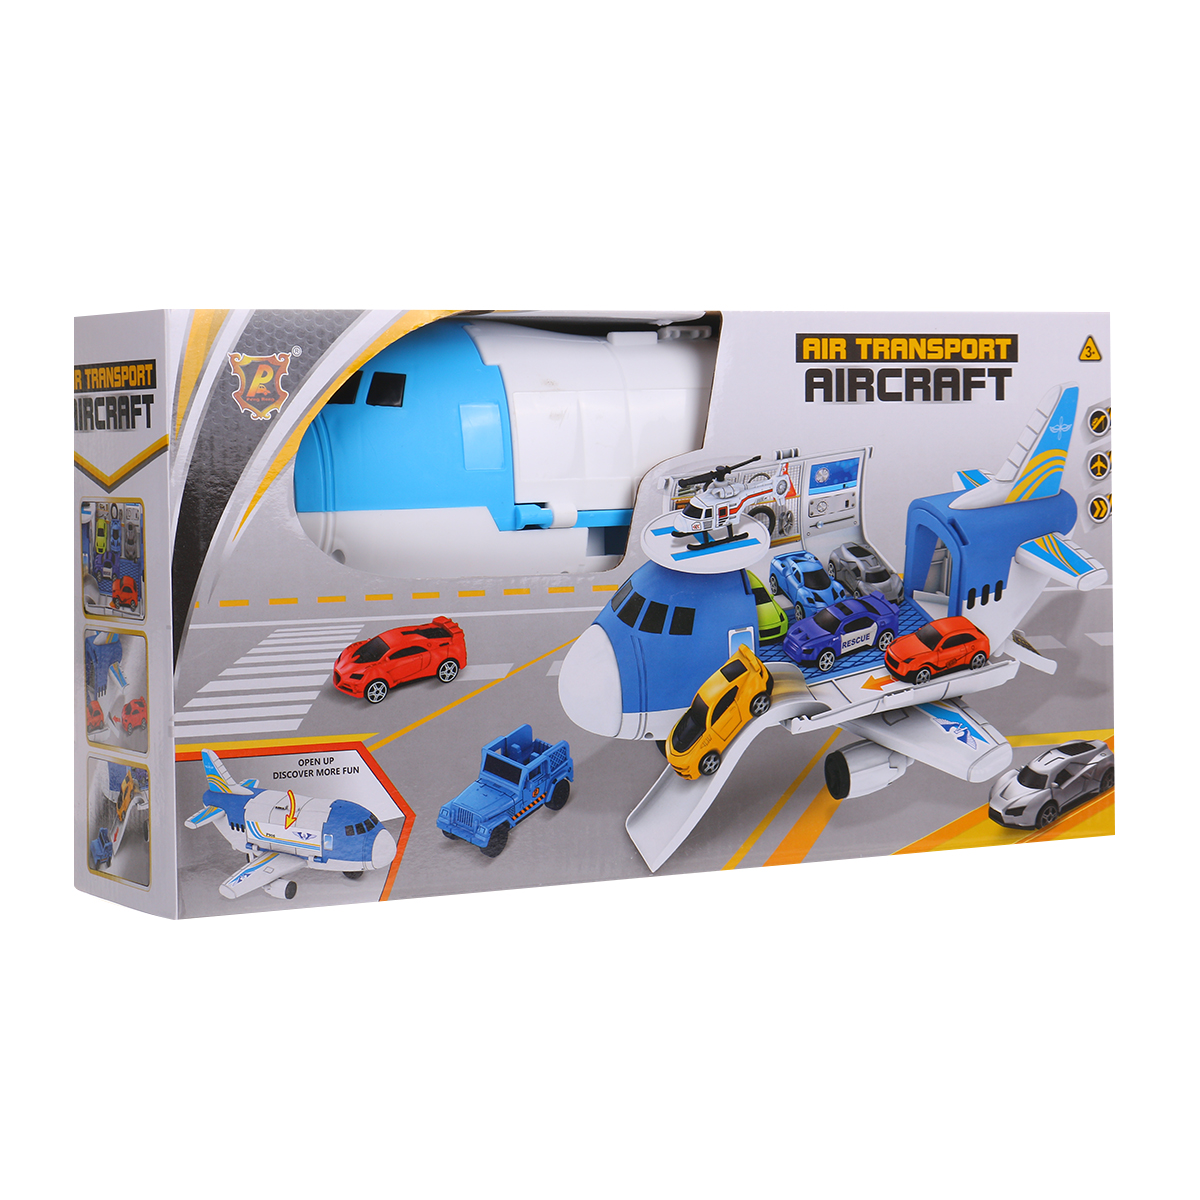 Storage-Transport-Aircraft-Model-Inertia-Diecast-Model-Car-Set-Toy-for-Childrens-Gift-1621631-12